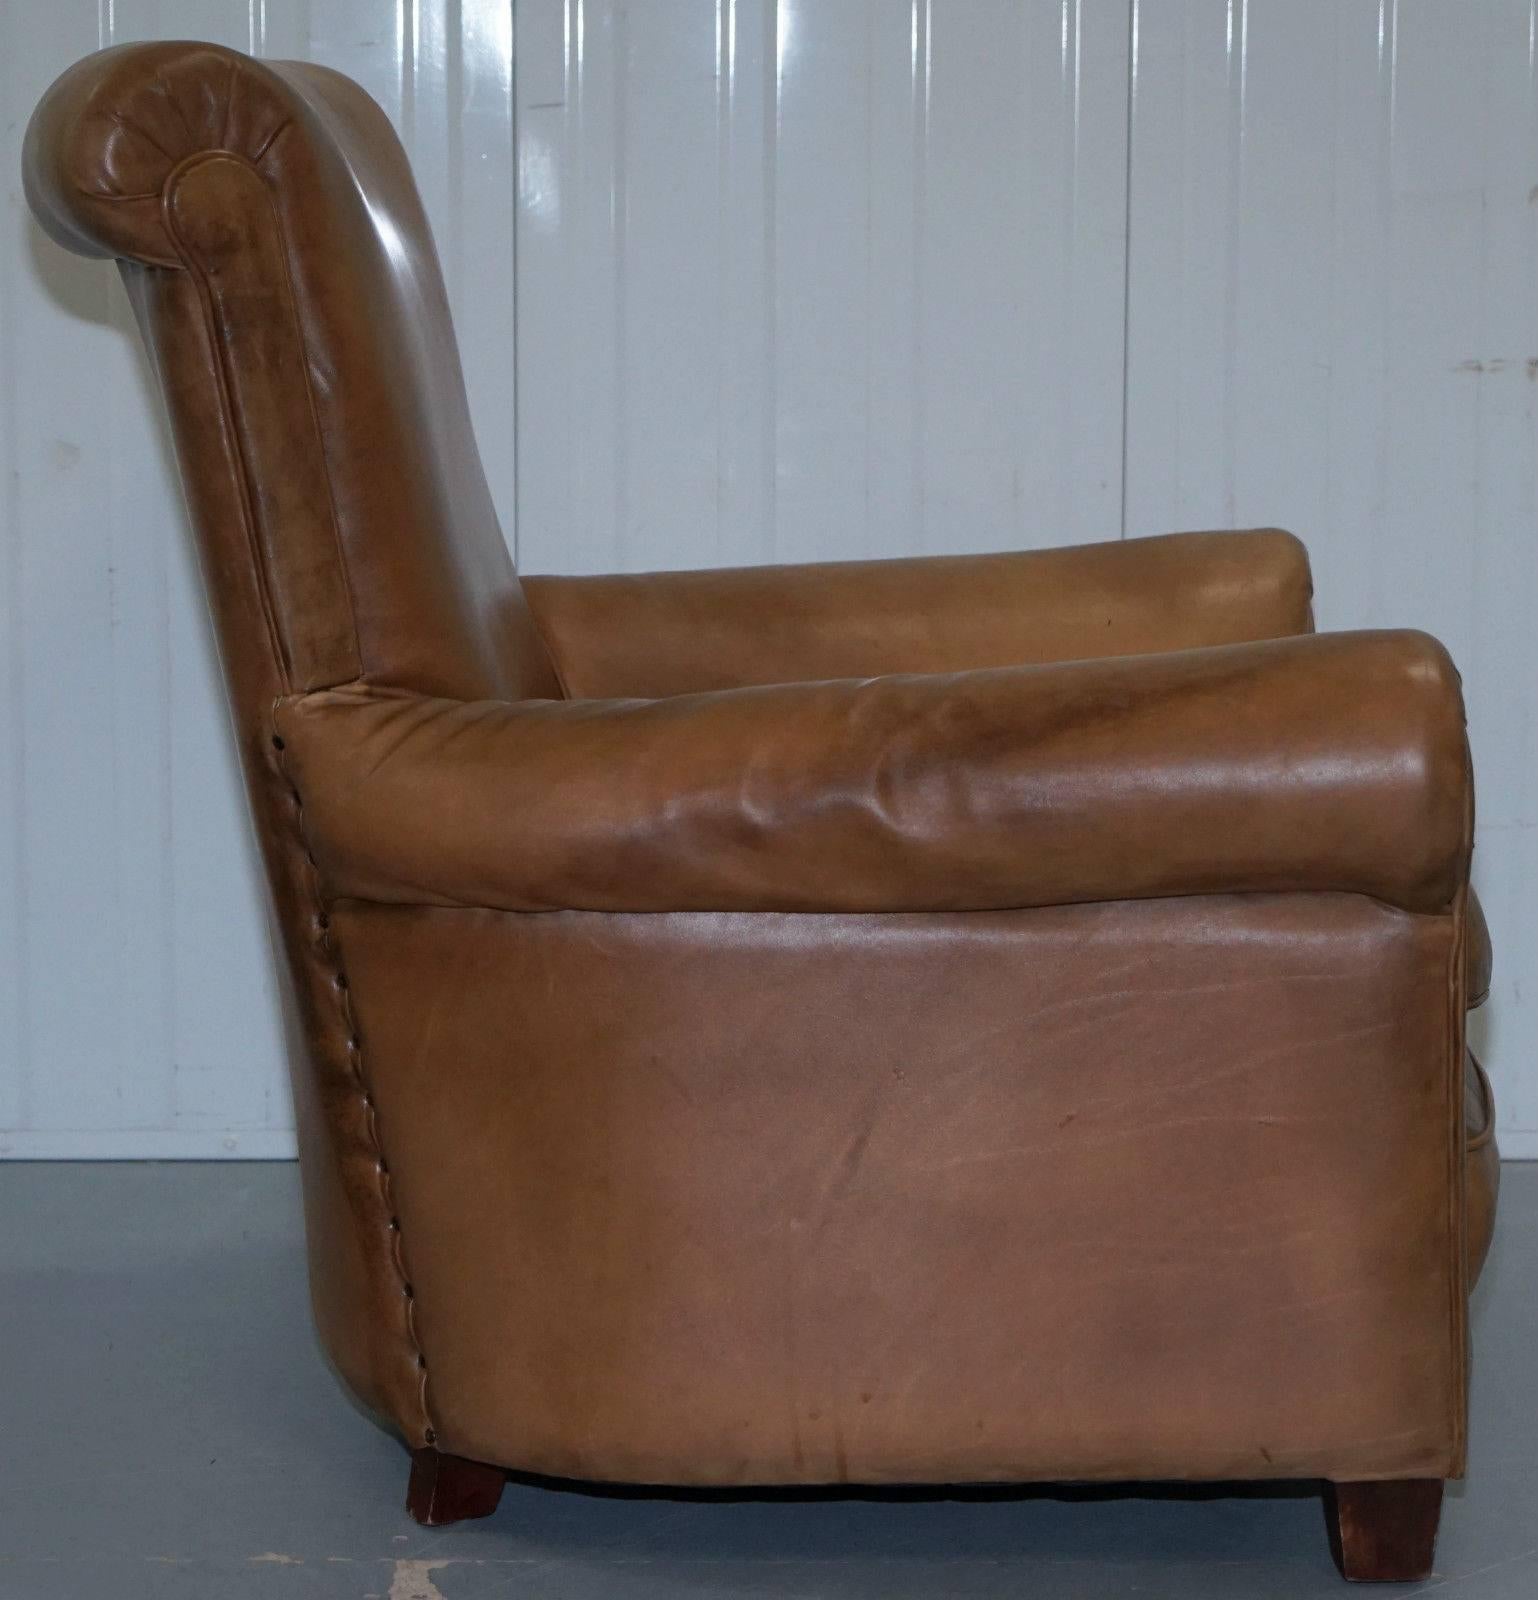 Antique Aged Tan Brown Leather Full Aniline English Gentlens Club Armchair 1